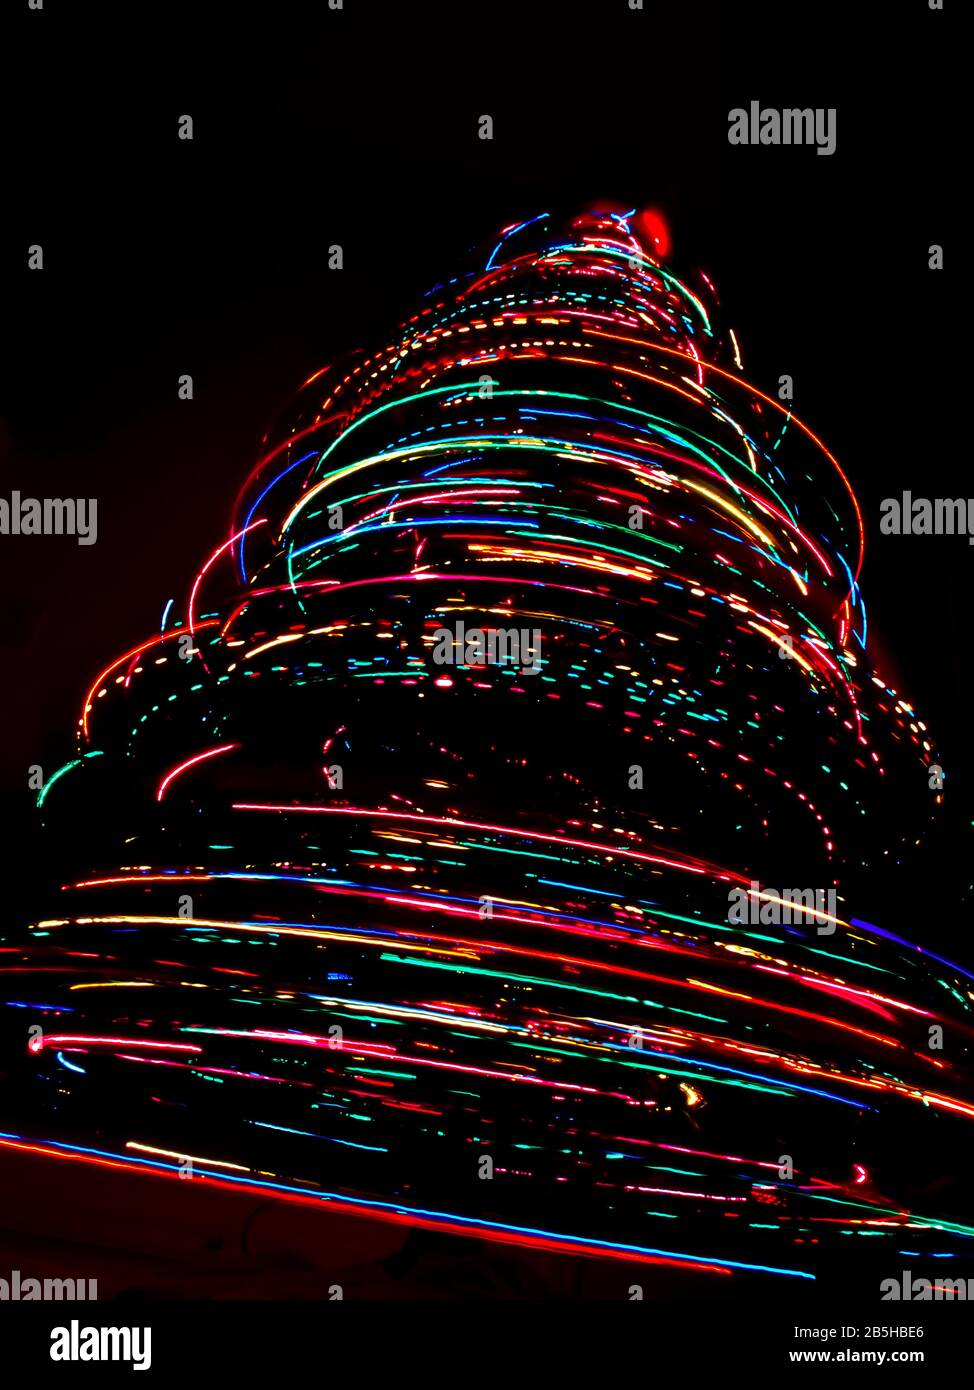 An abstract vortex of light created by taking a long exposure of a rotating Christmas Tree filled with colored lights. Stock Photo